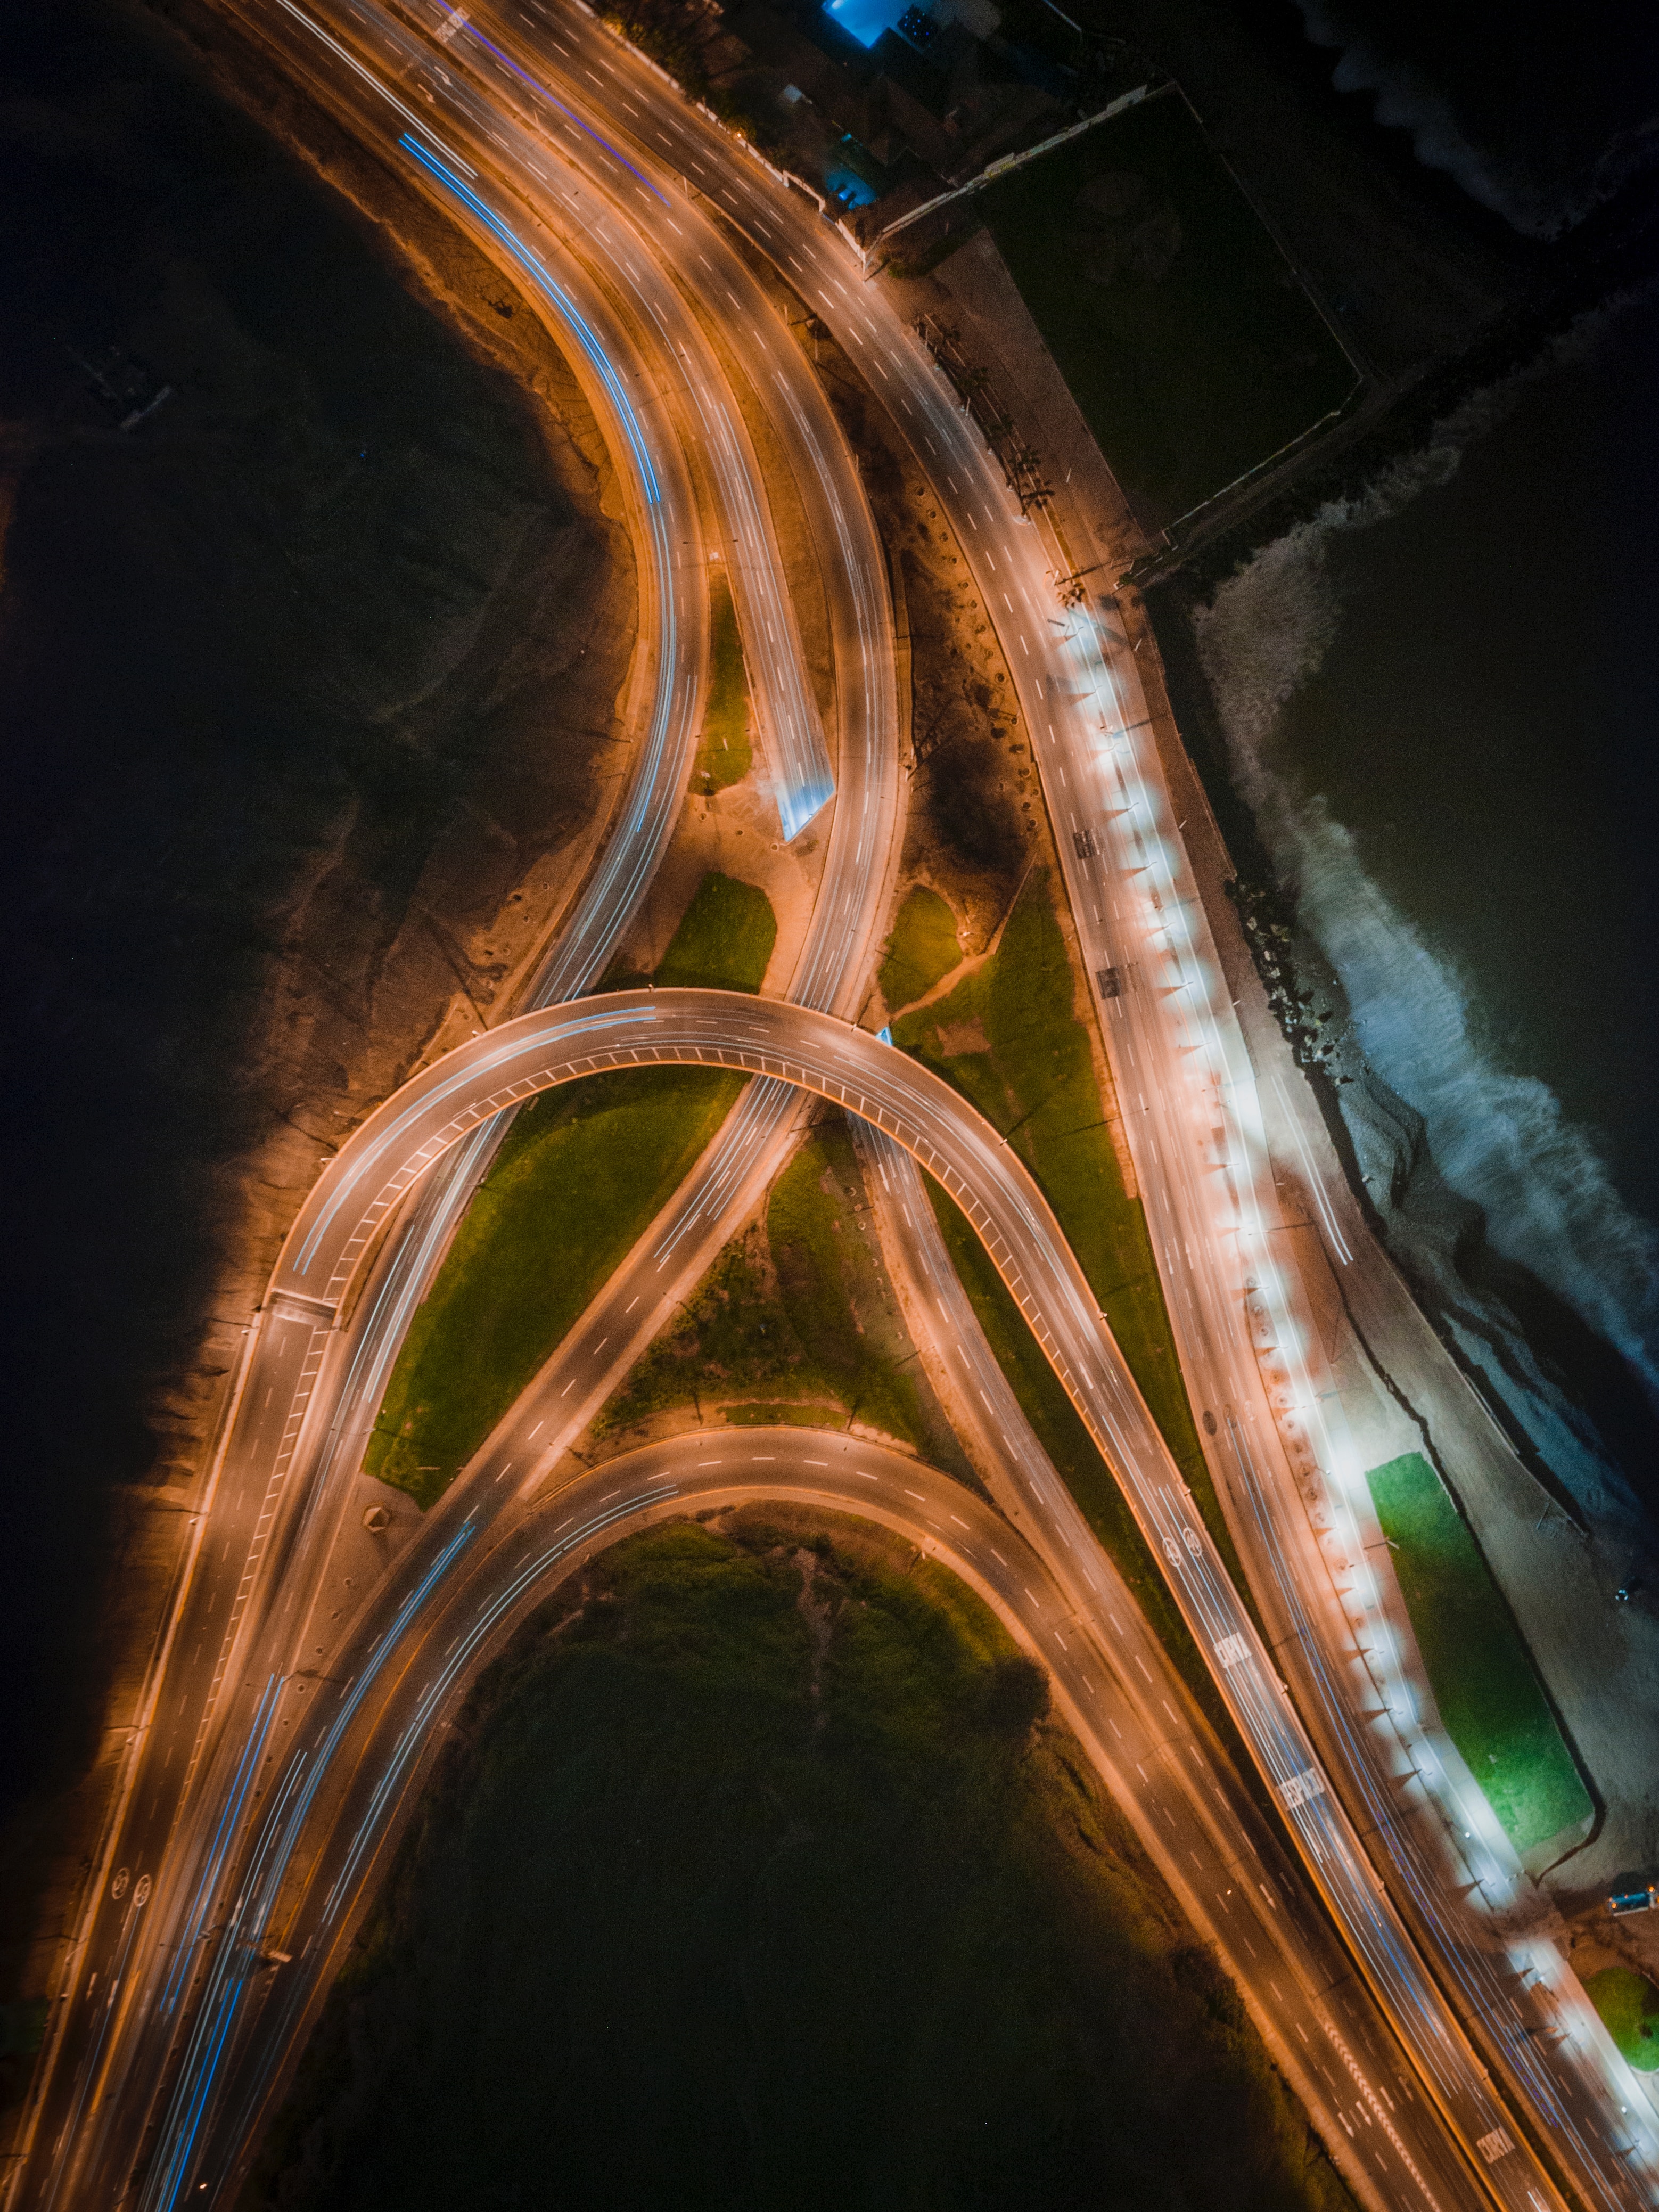 backlight, intricate, view from above, dark, road, illumination, confused, road junction cellphone